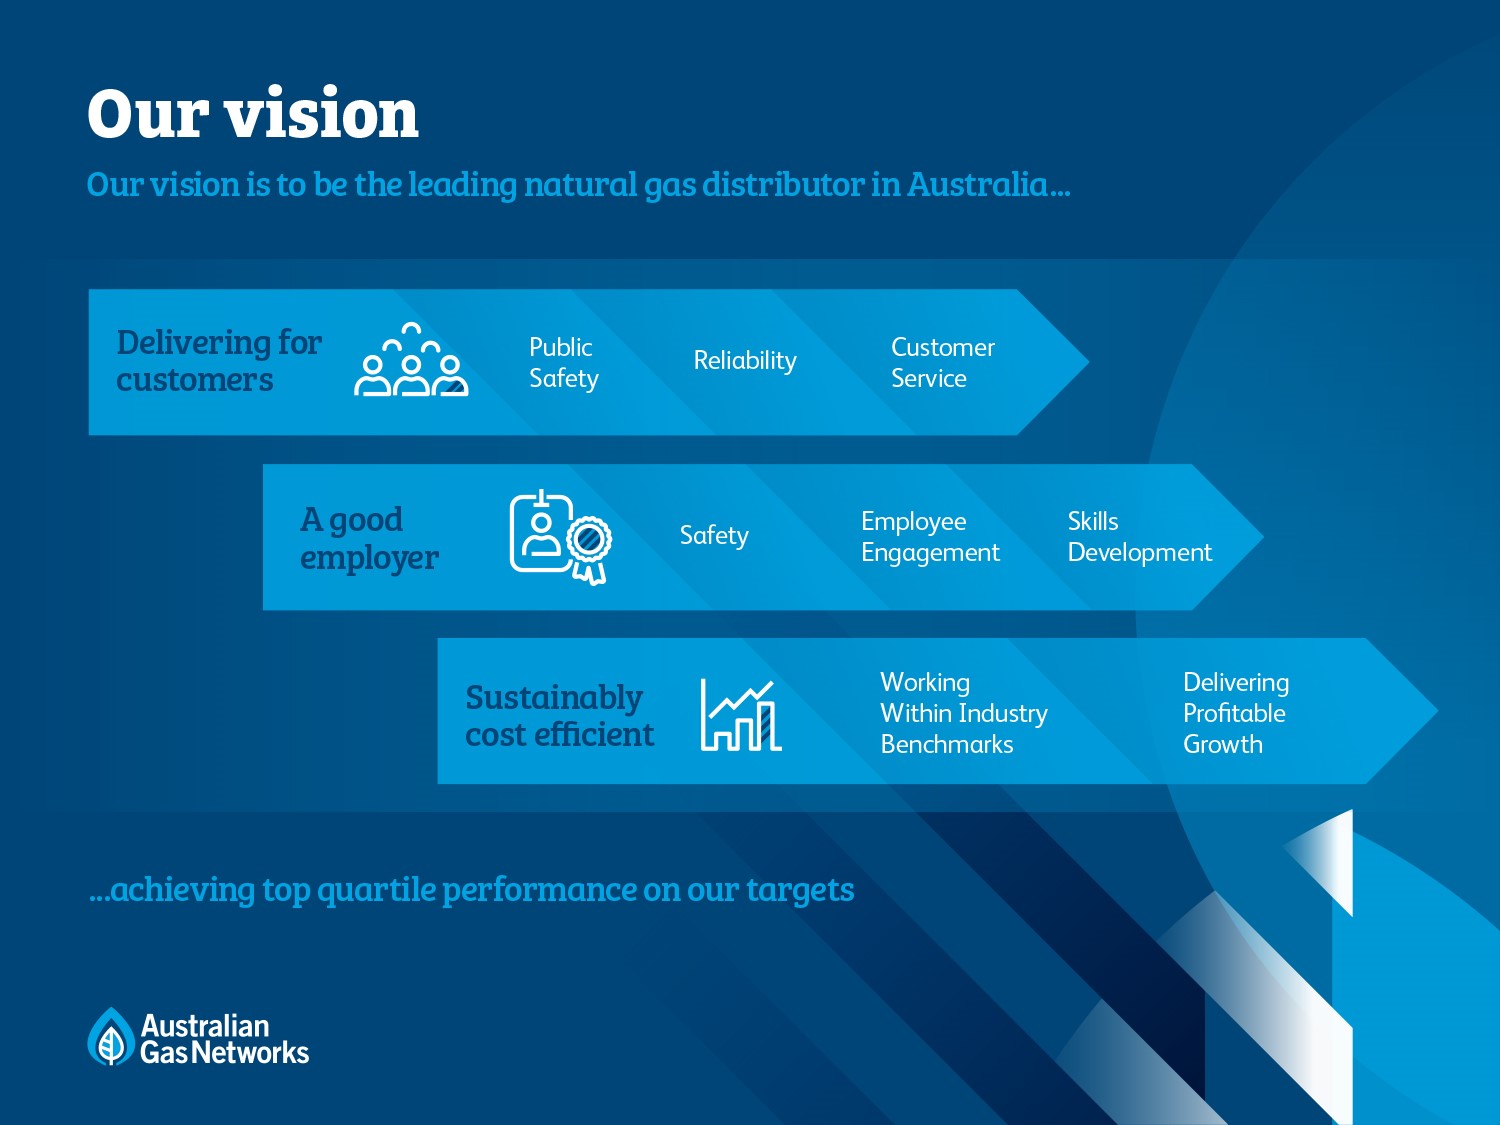 Our vision is to be the leading natural gas distributor in Australia